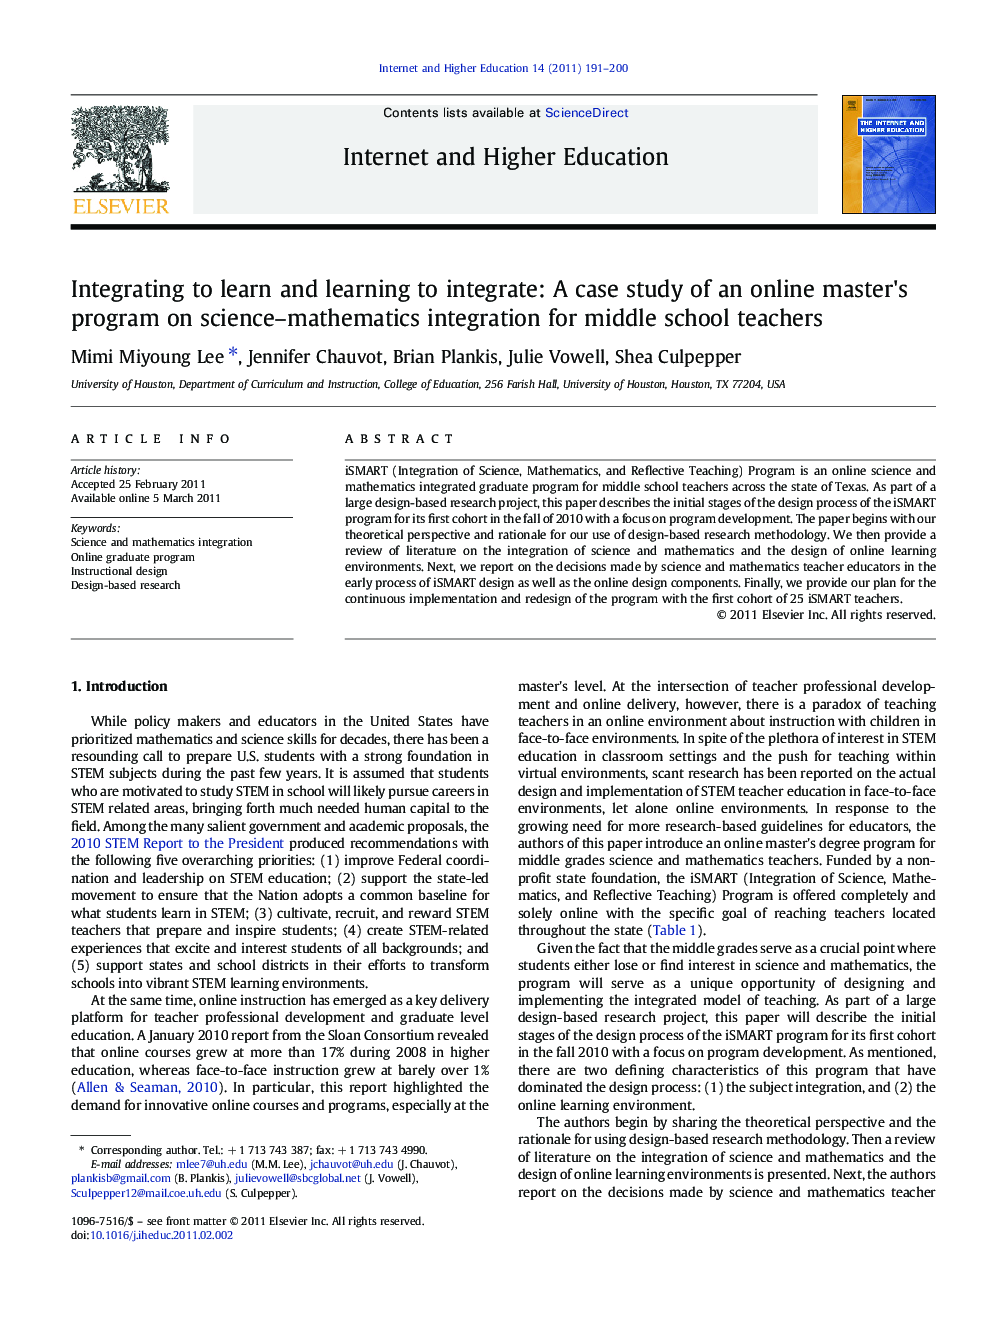 Integrating to learn and learning to integrate: A case study of an online master's program on science–mathematics integration for middle school teachers